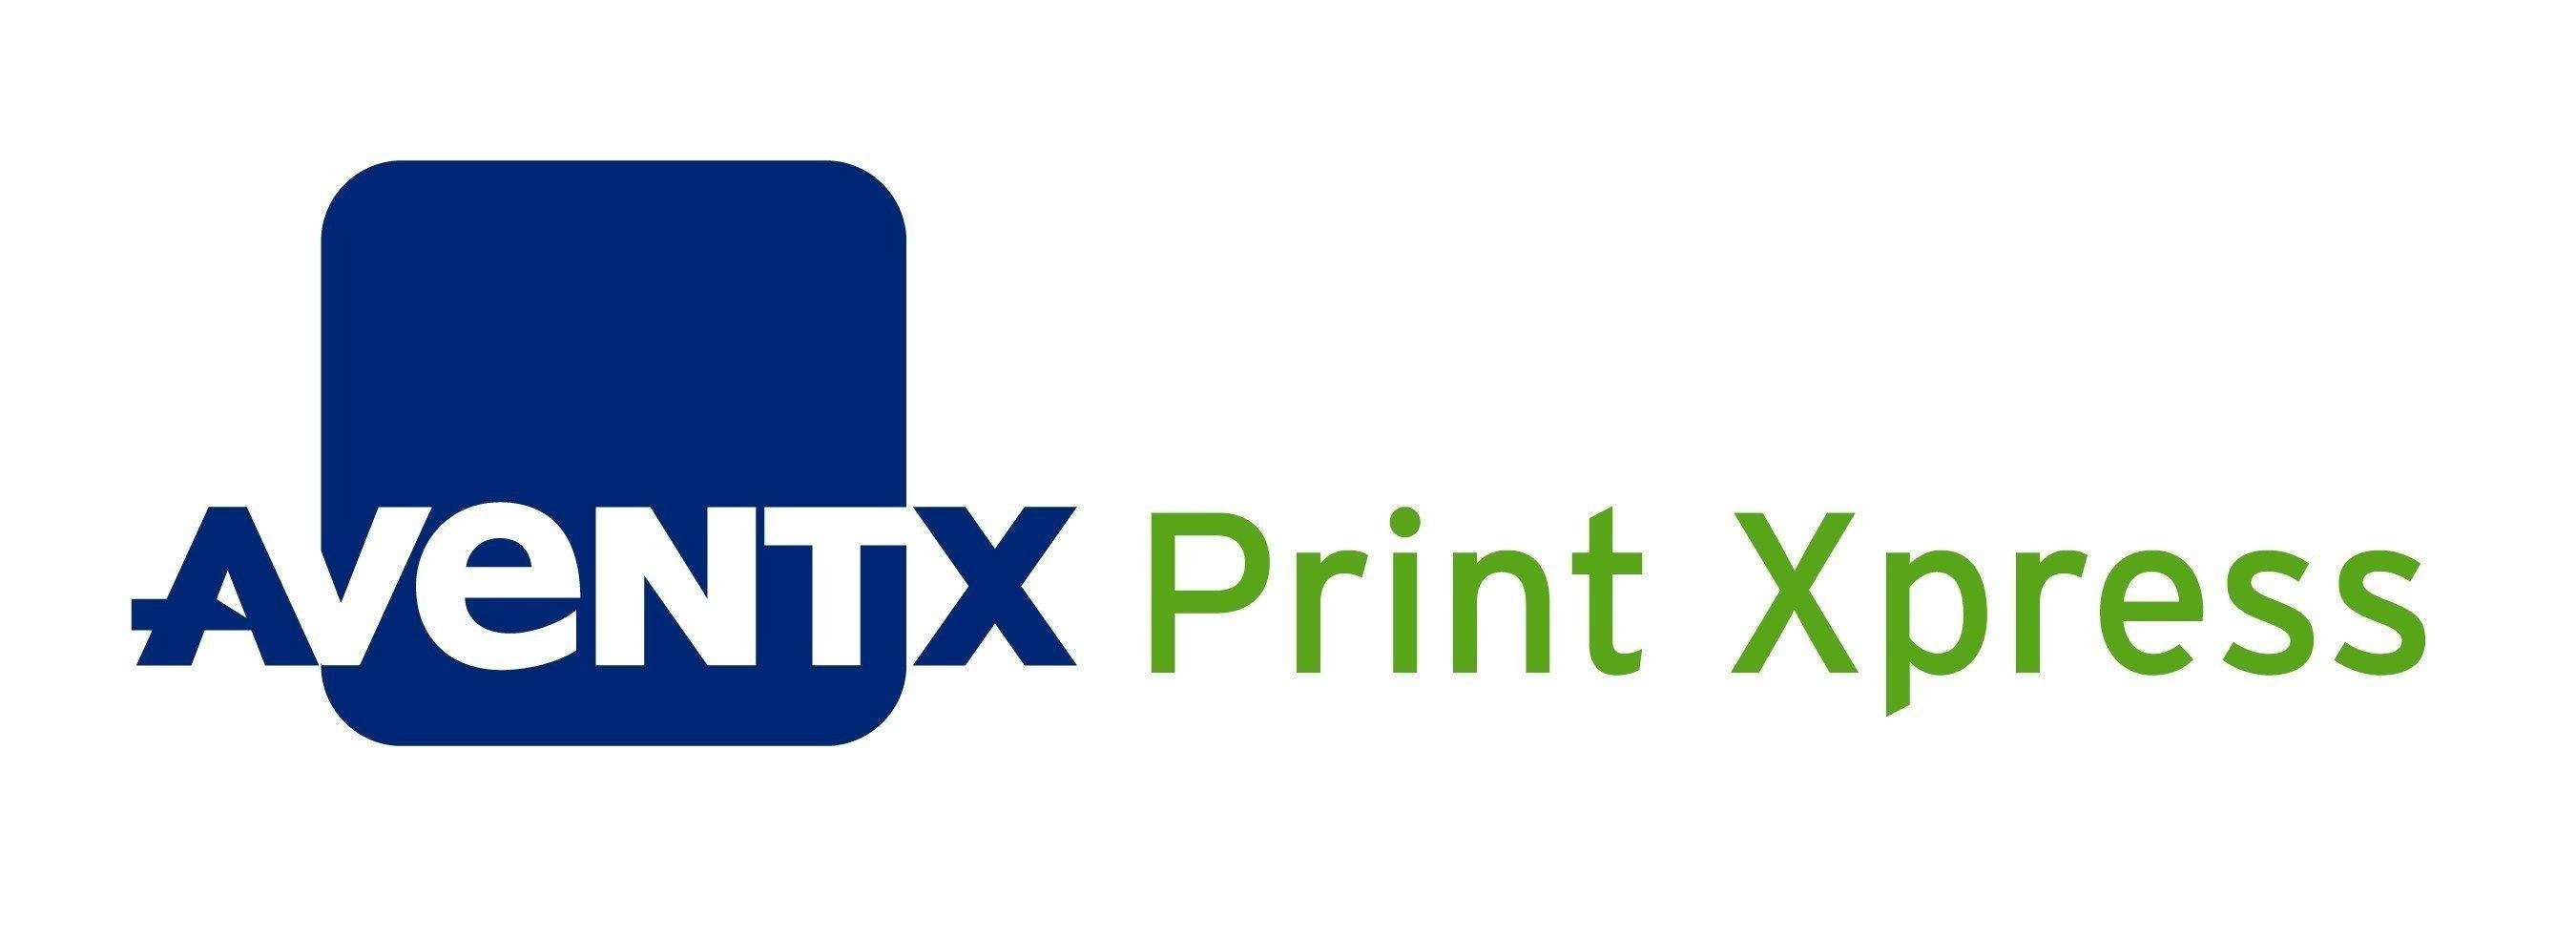 Oracle EBS Logo - STR Software Simplifies Printing in Oracle EBS with AventX Print Xpress